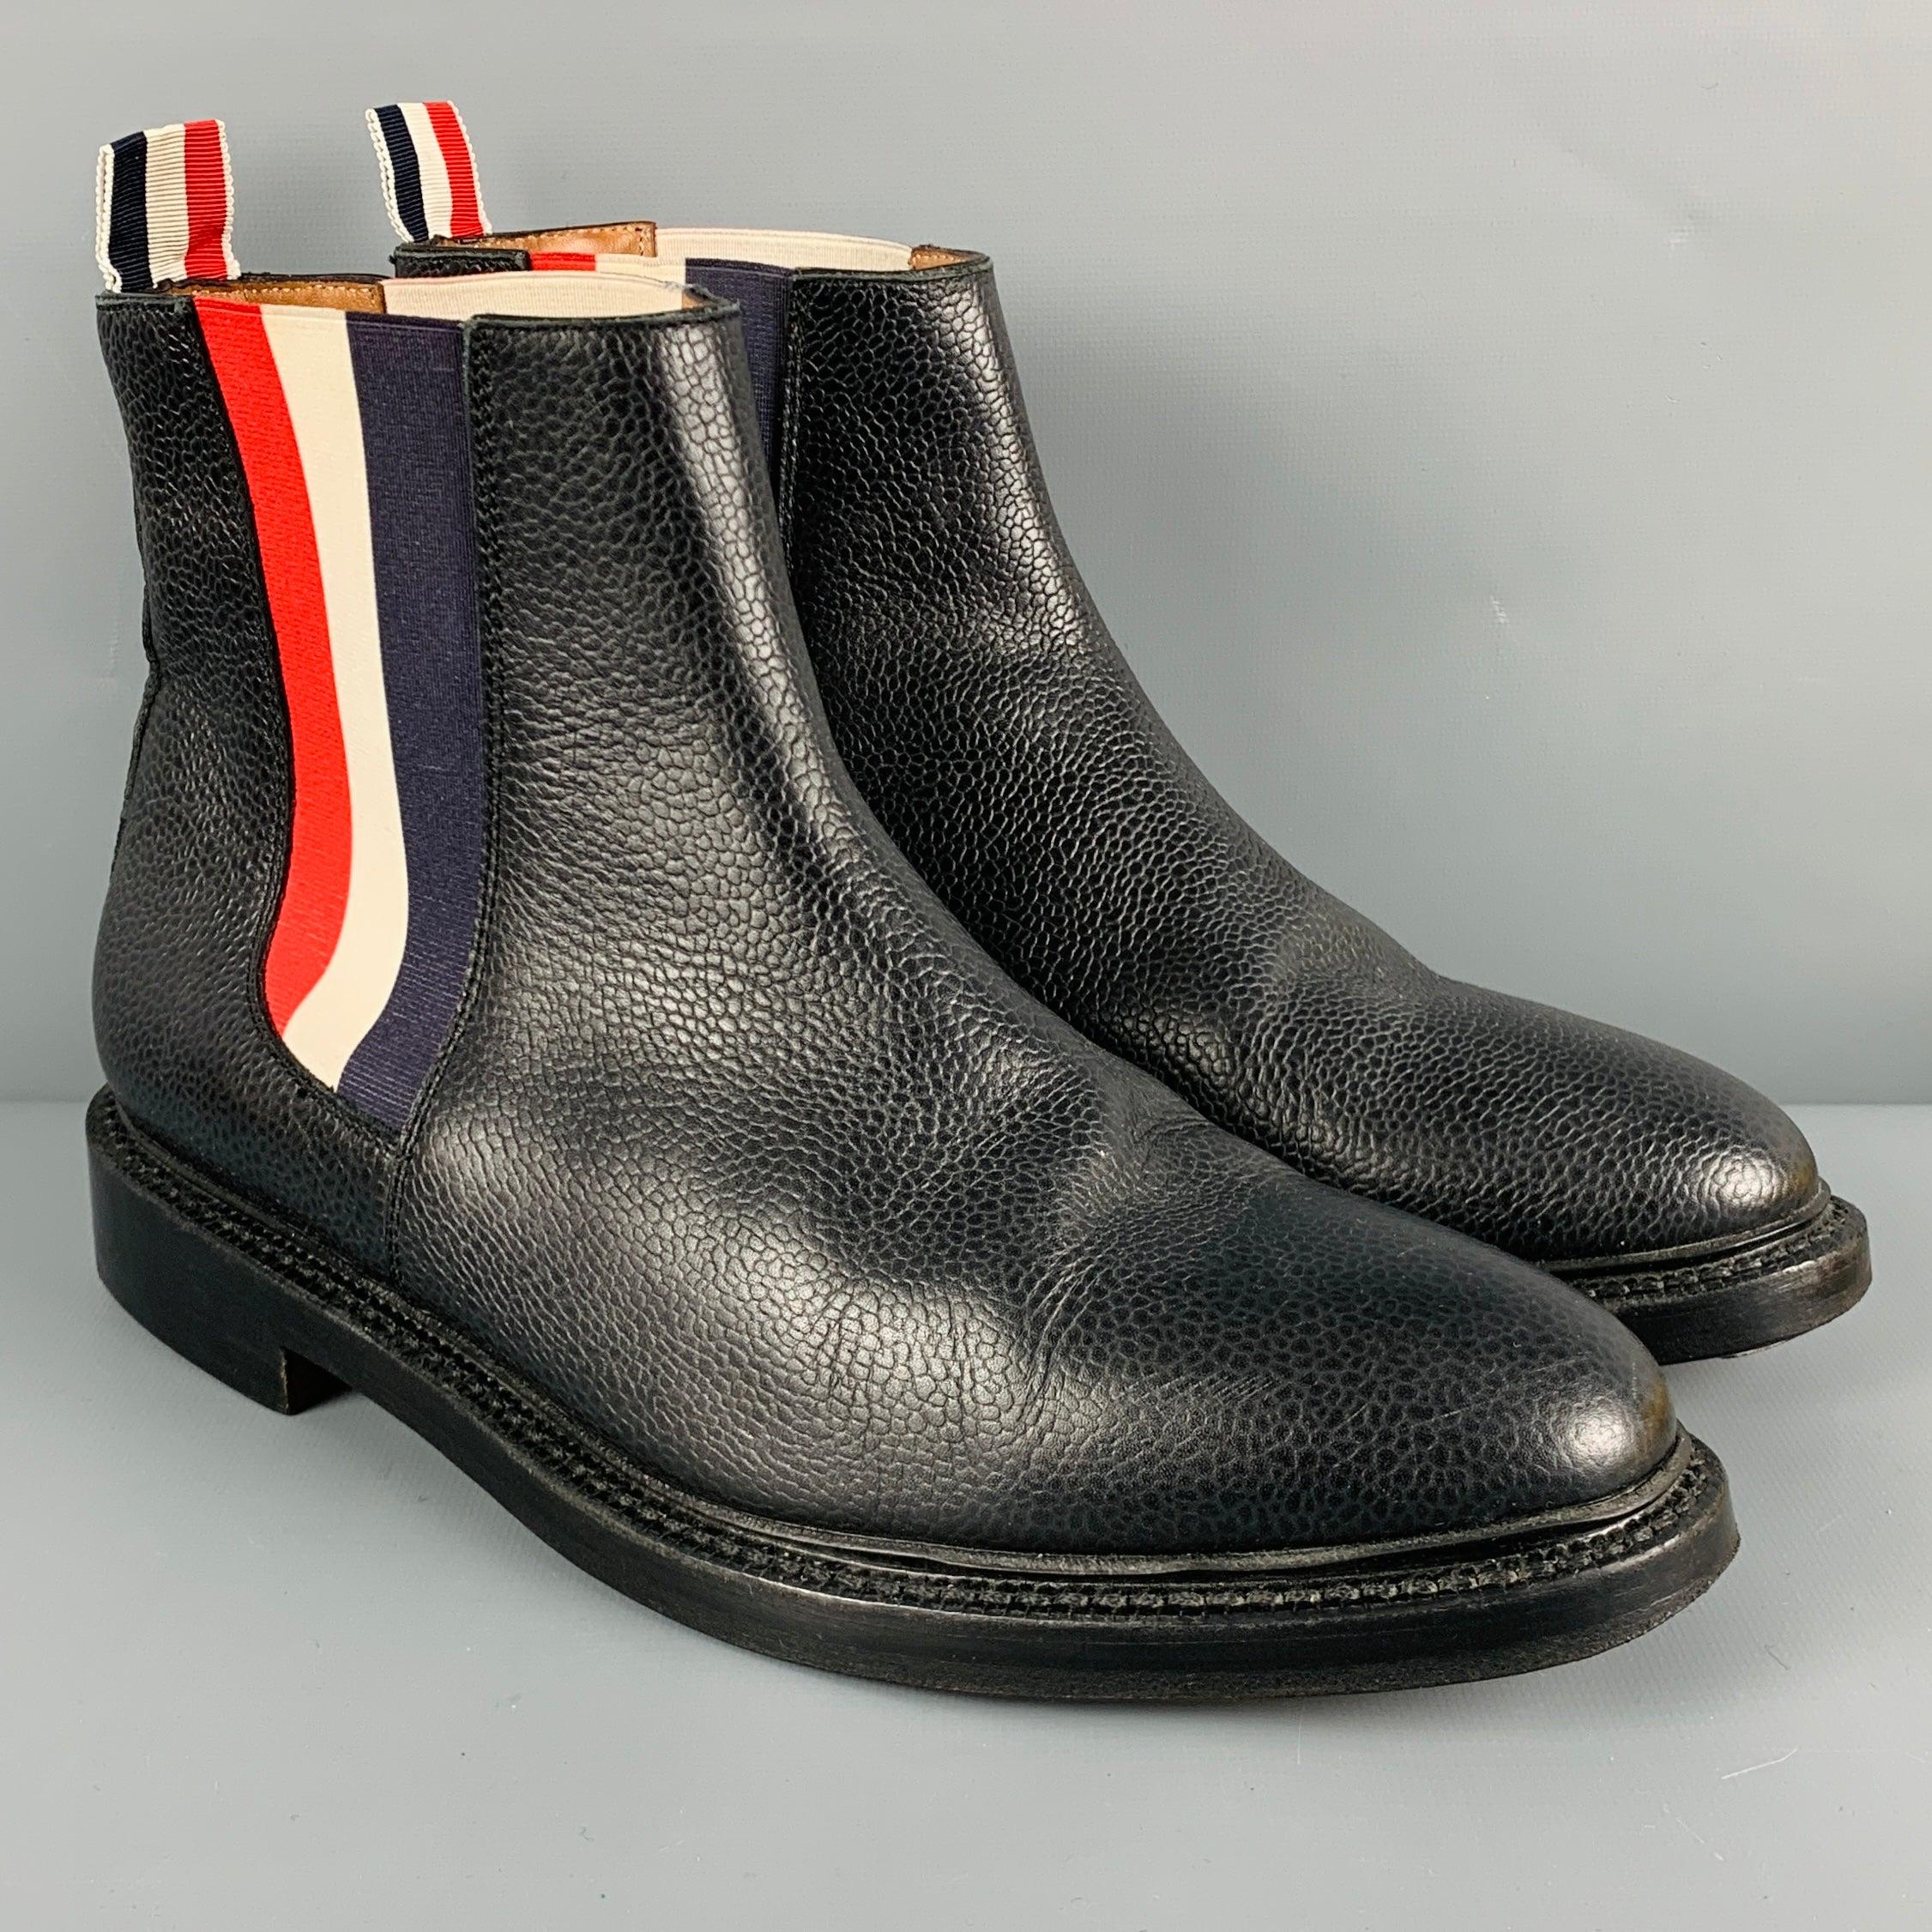 THOM BROWNE
boots in a black leather fabric featuring a Chelsea ankle style with red & white elastic panels, pebble grain texture, and a pull on closure. Made in Italy.Very Good Pre-Owned Condition. 

Marked:   EU 42 

Measurements: 
  Length: 11.75